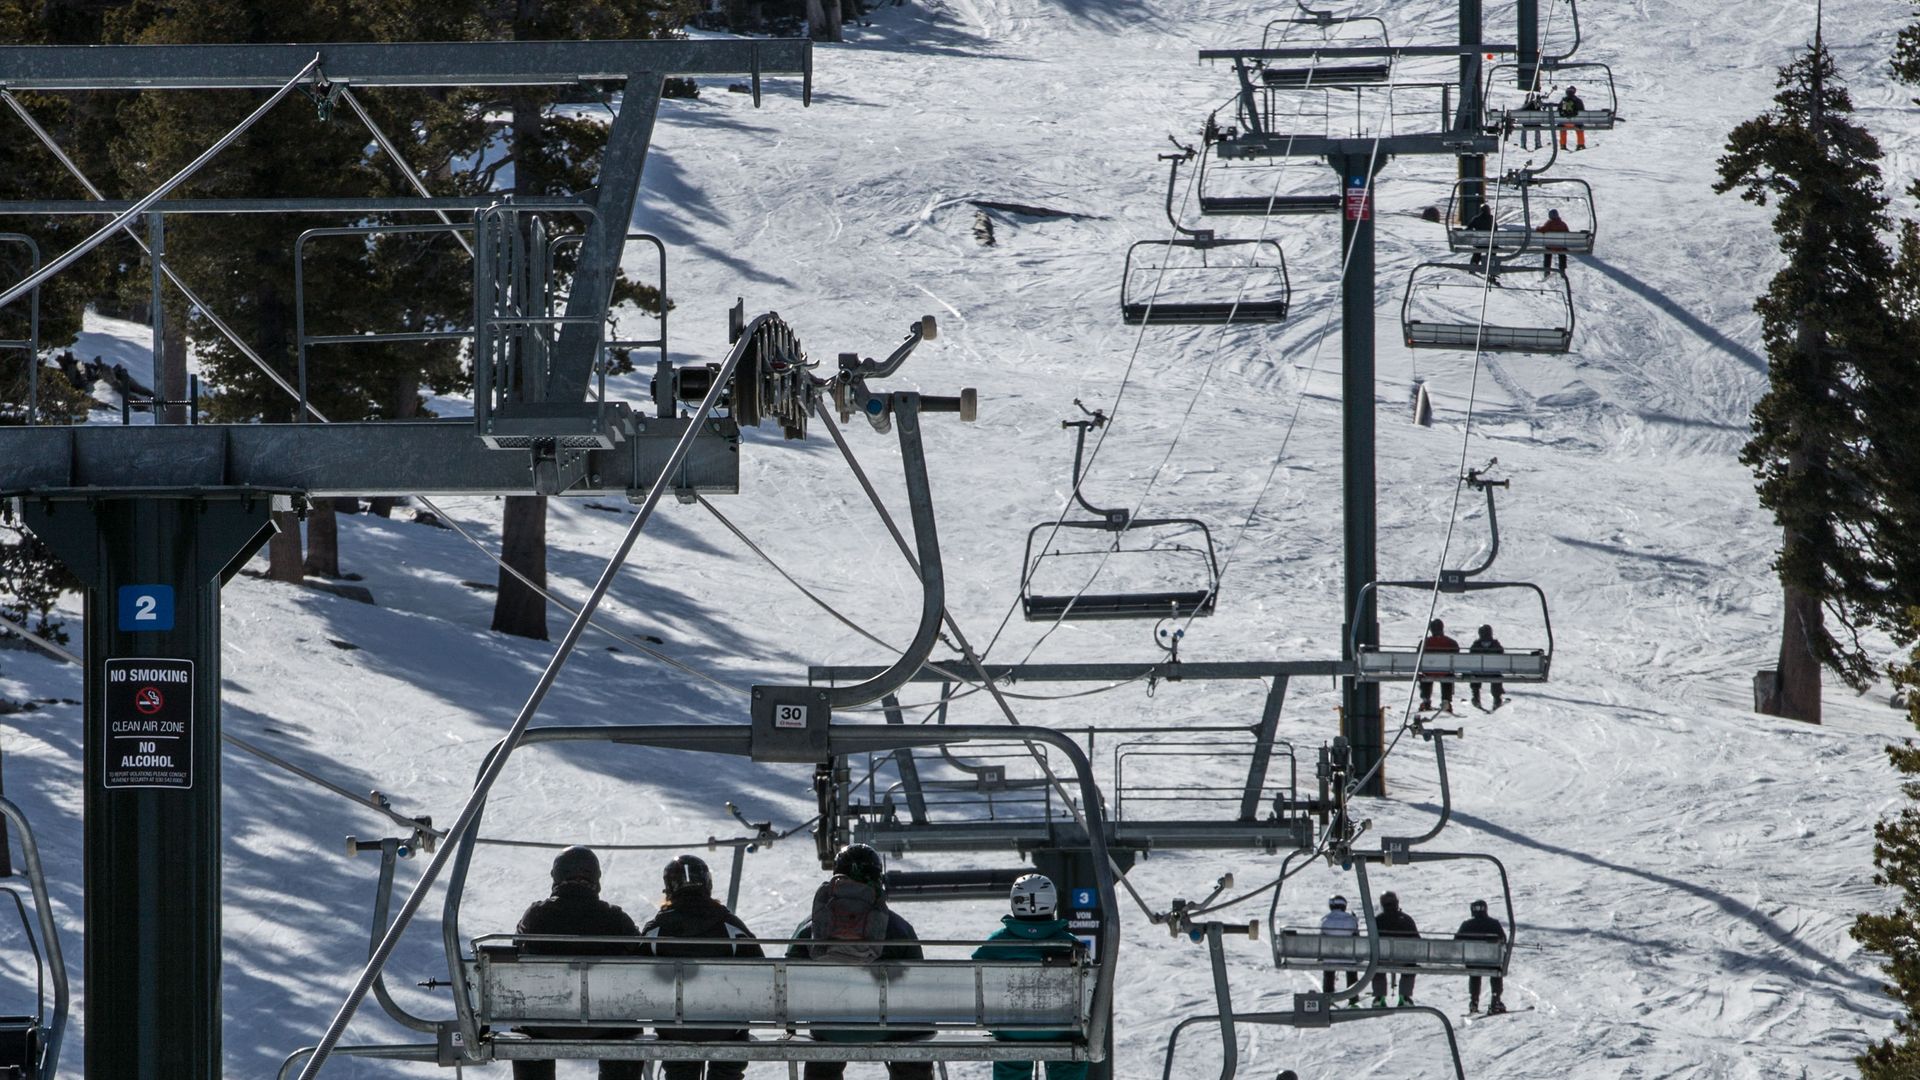 Picture of a ski chairlift